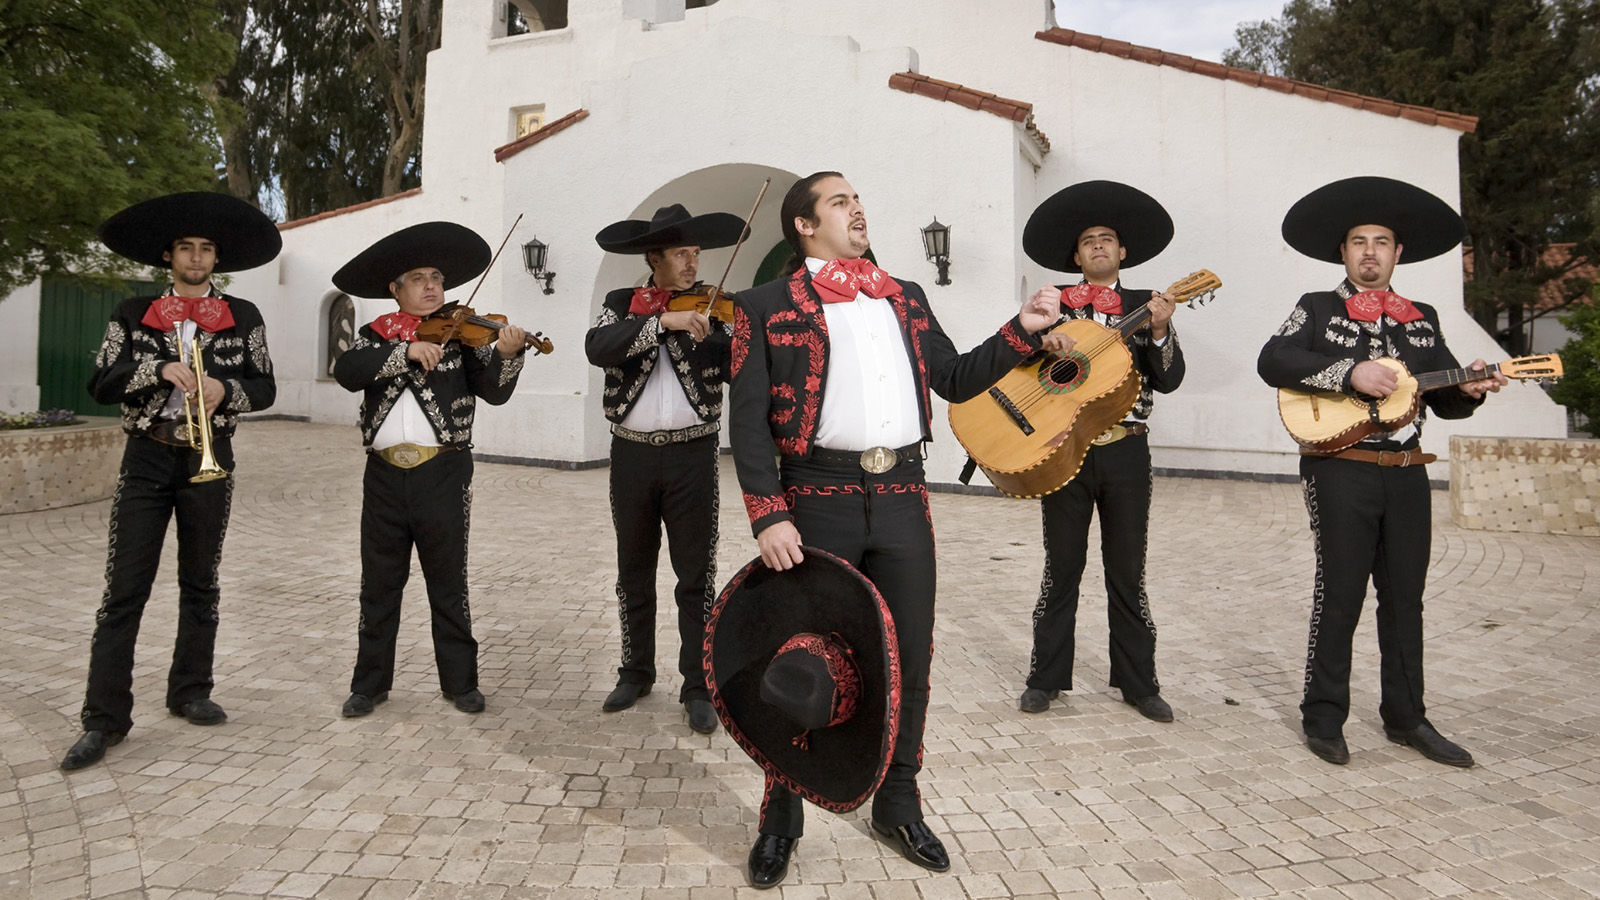 Mariachi band music from Mexico